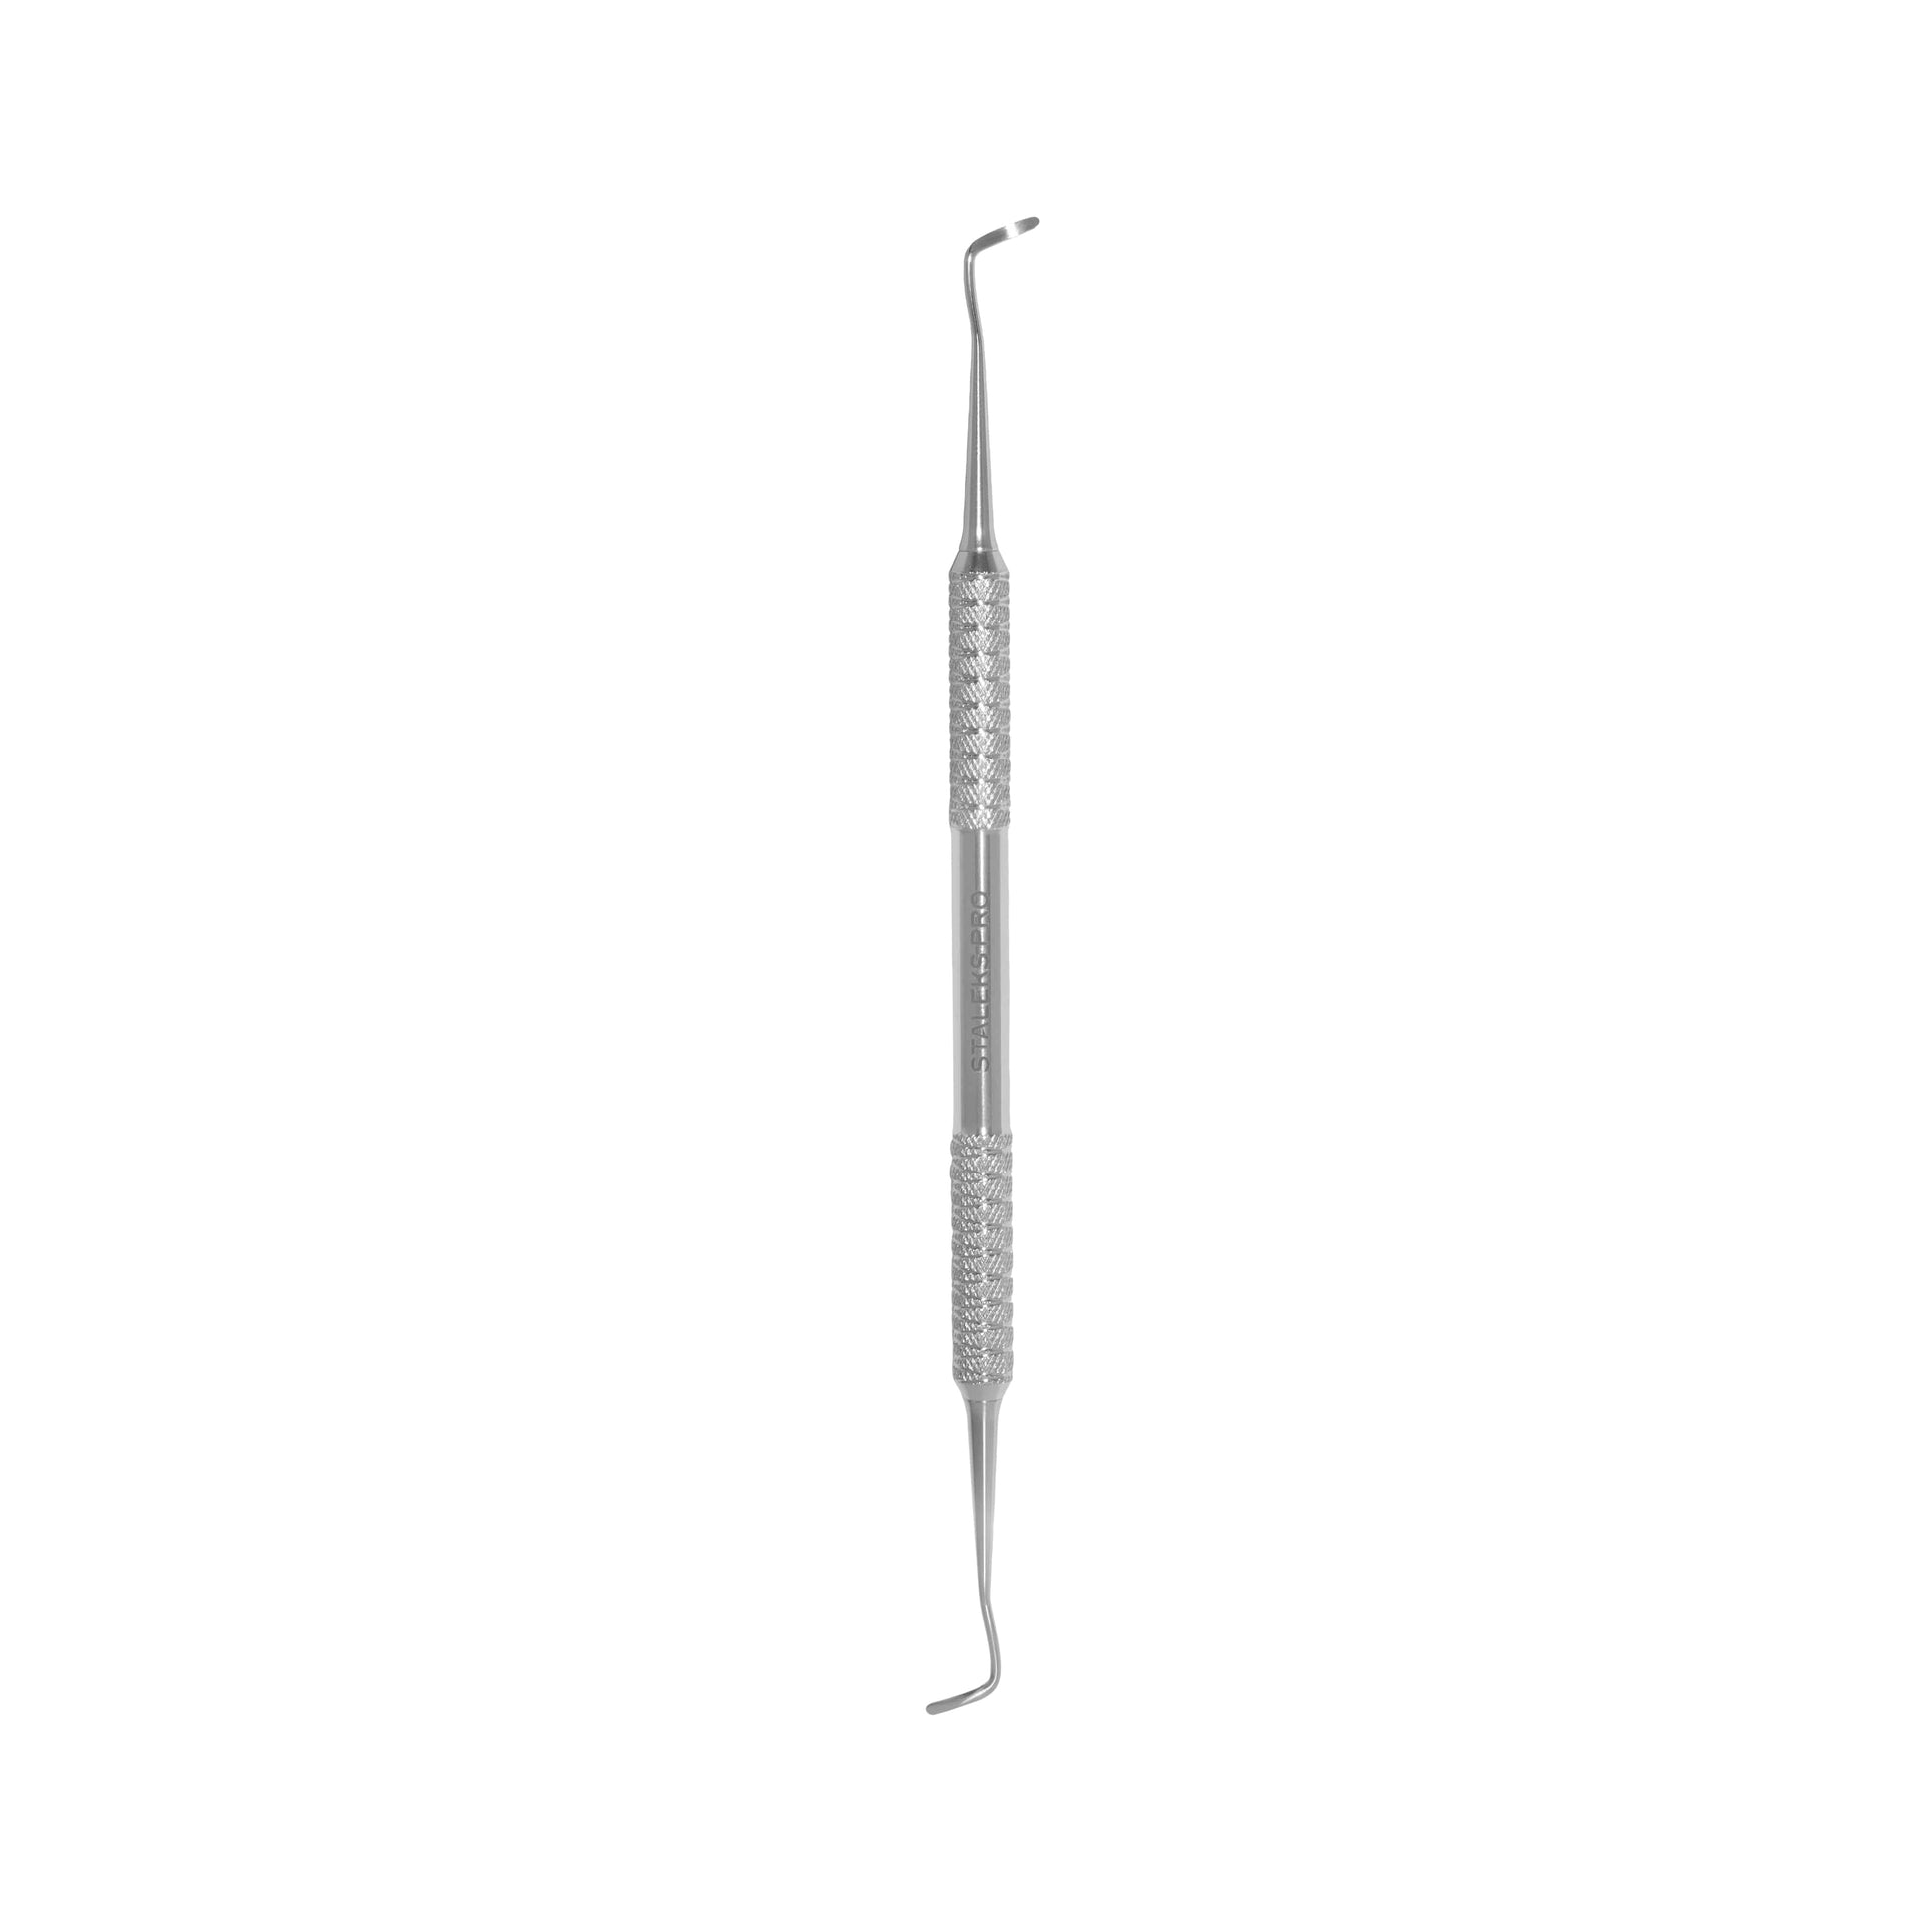 Staleks Pedicure pusher tool EXPERT 20 TYPE 2 (double-ended curette) - F.O.X Nails USA